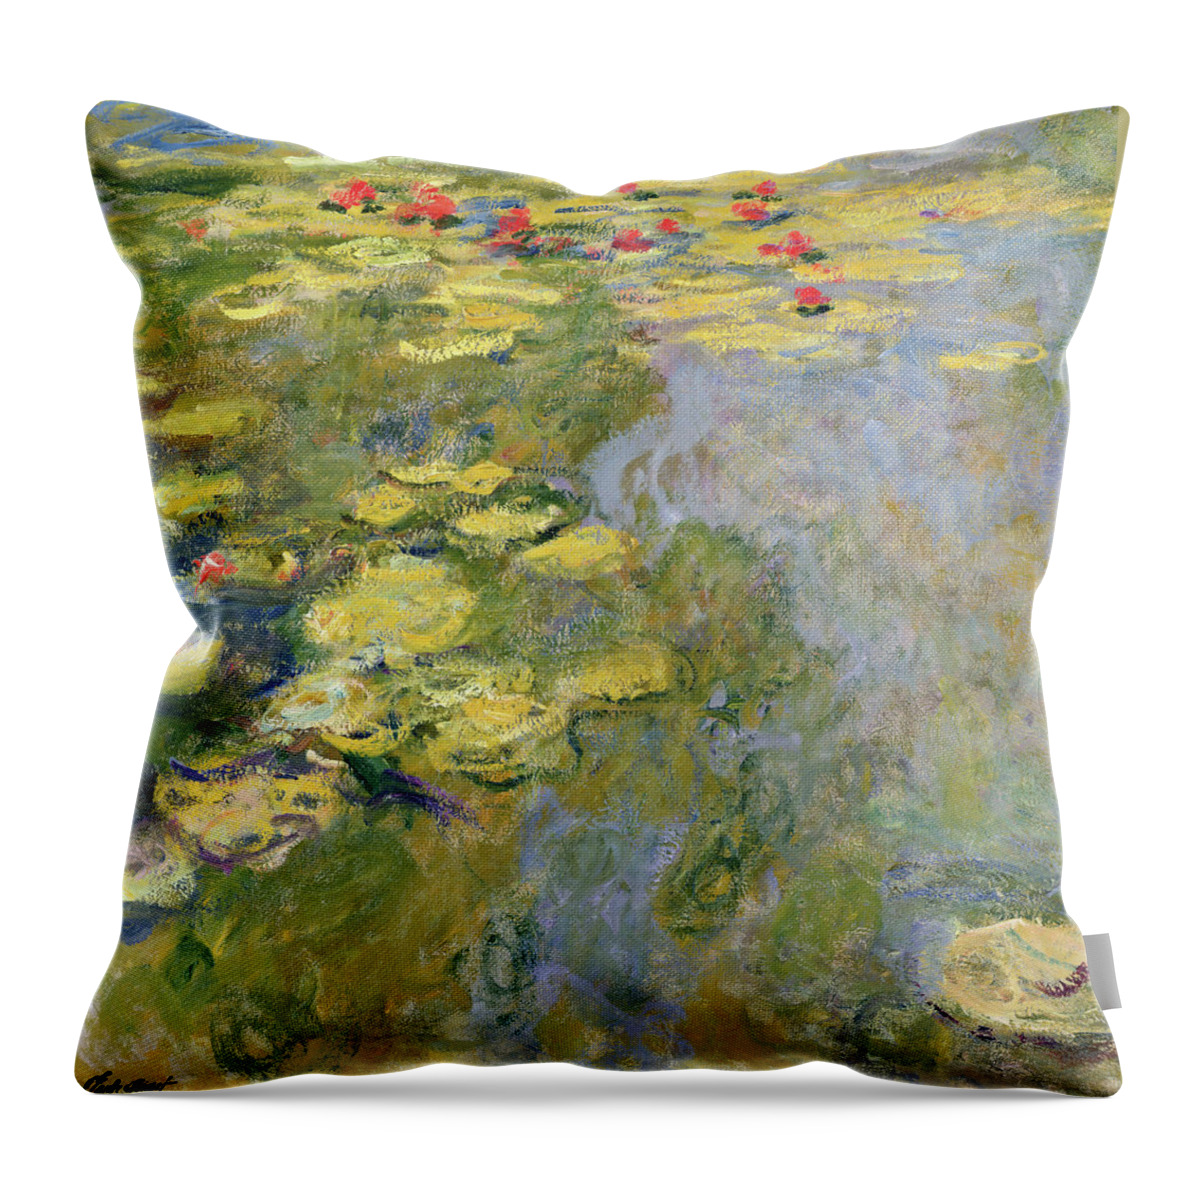 Impressionism Throw Pillow featuring the painting The Waterlily Pond by Claude Monet